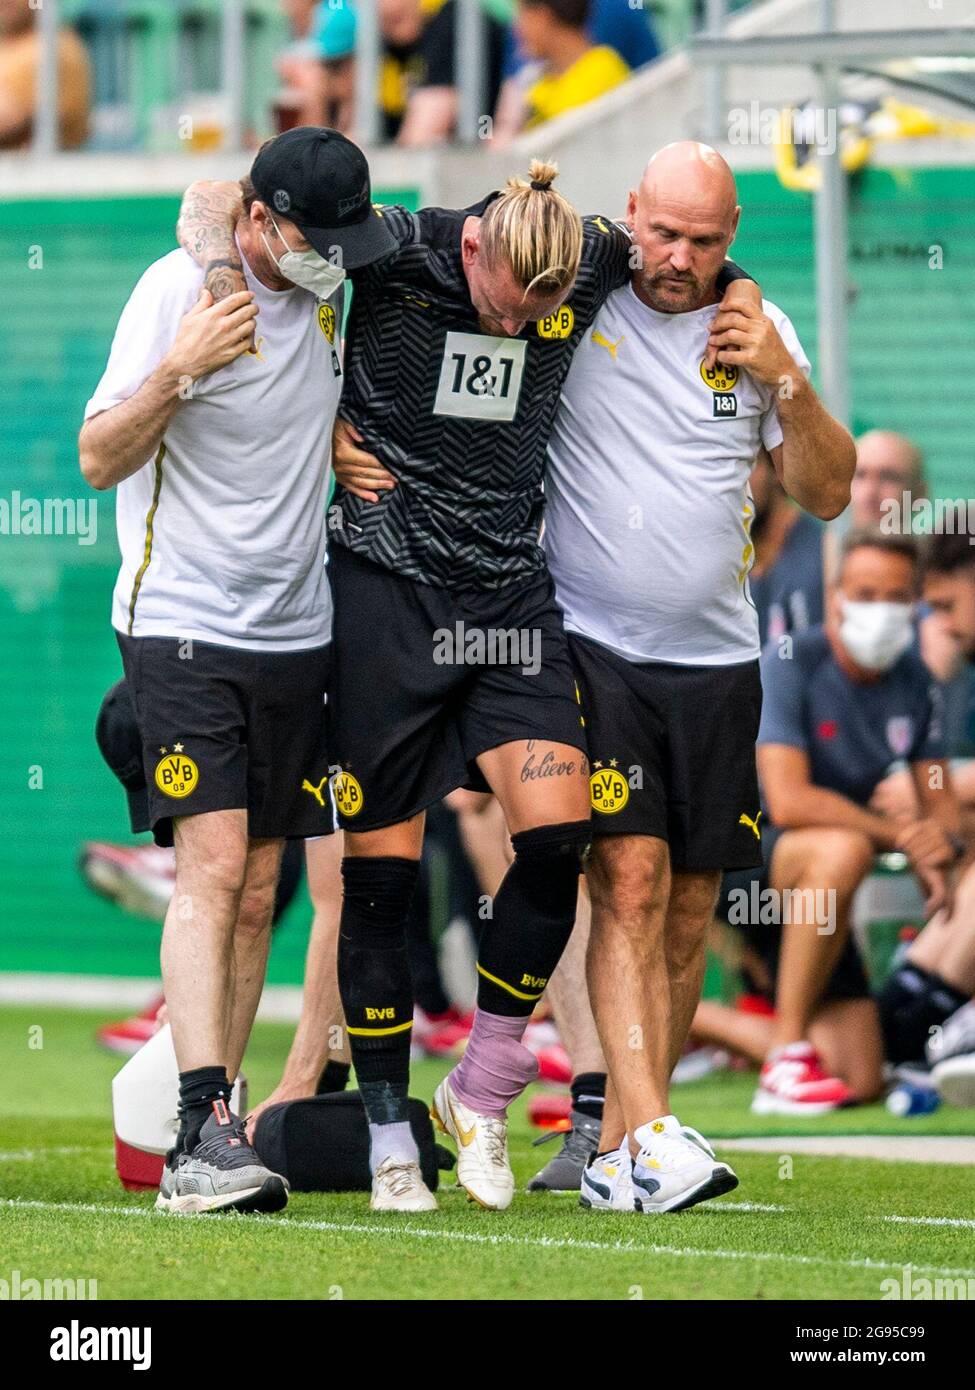 St. Gallen, Switzerland. 24th July, 2021. Football: Bundesliga, Test  matches, Borussia Dortmund - Athletic Bilbao at Kybunpark. Dortmund's  Marius Wolf is substituted with an injury. Credit: David Inderlied/dpa -  IMPORTANT NOTE: In